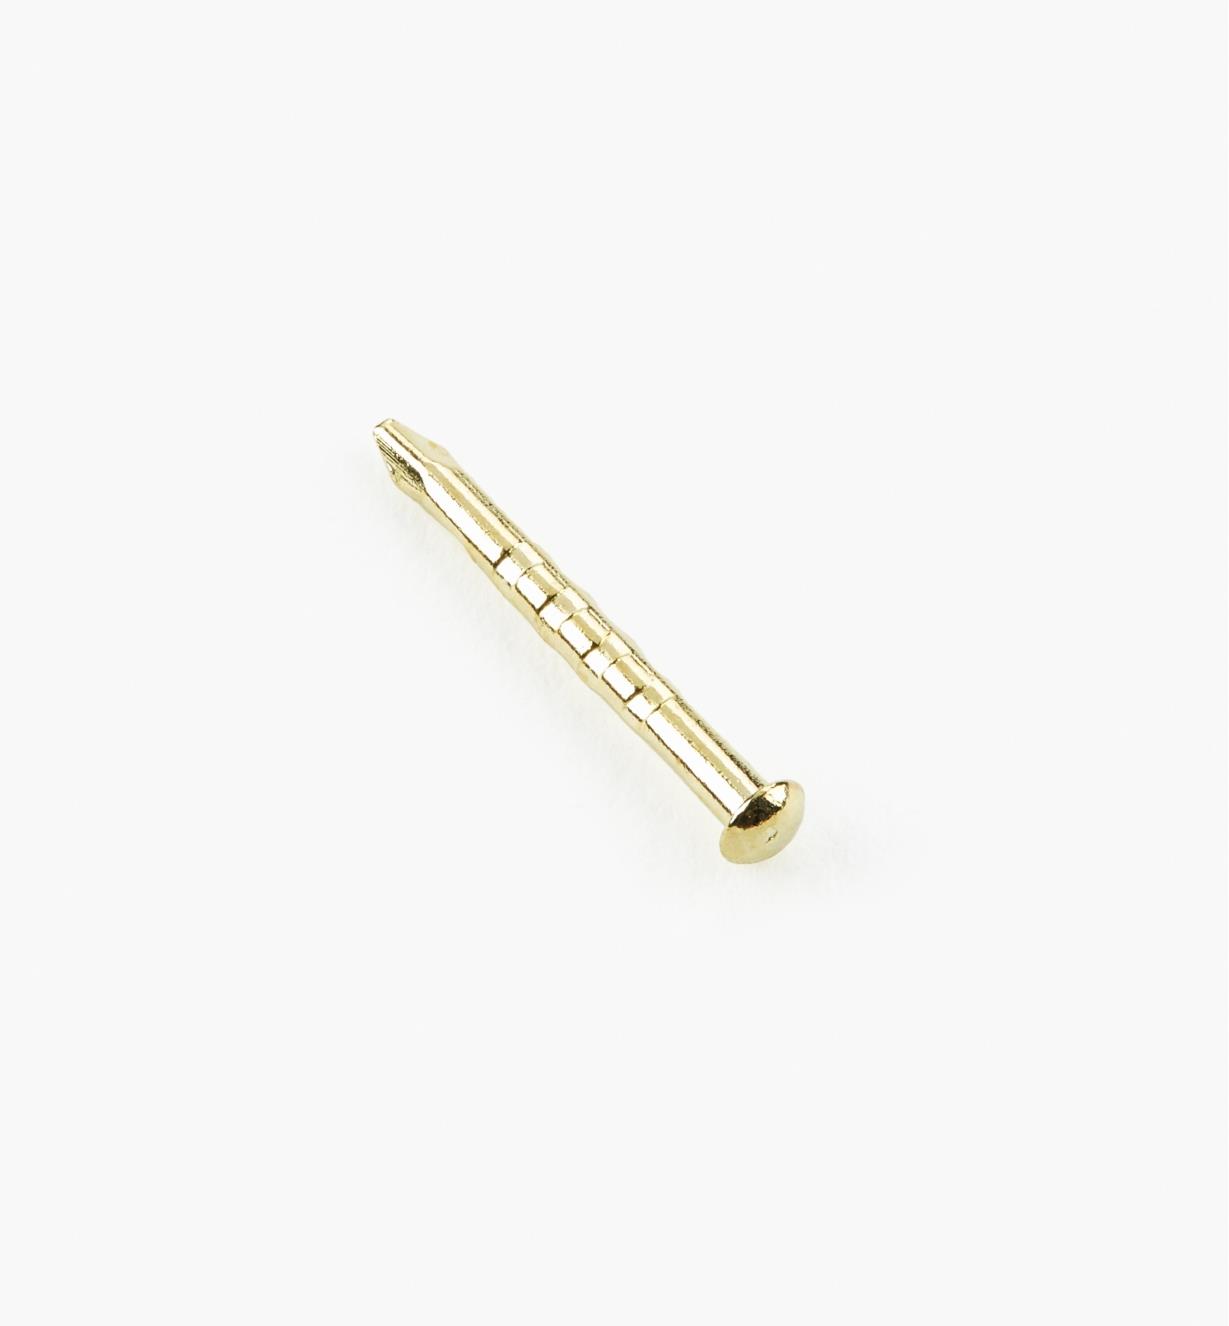 Brass-Plated Escutcheon Pins - Lee Valley Tools